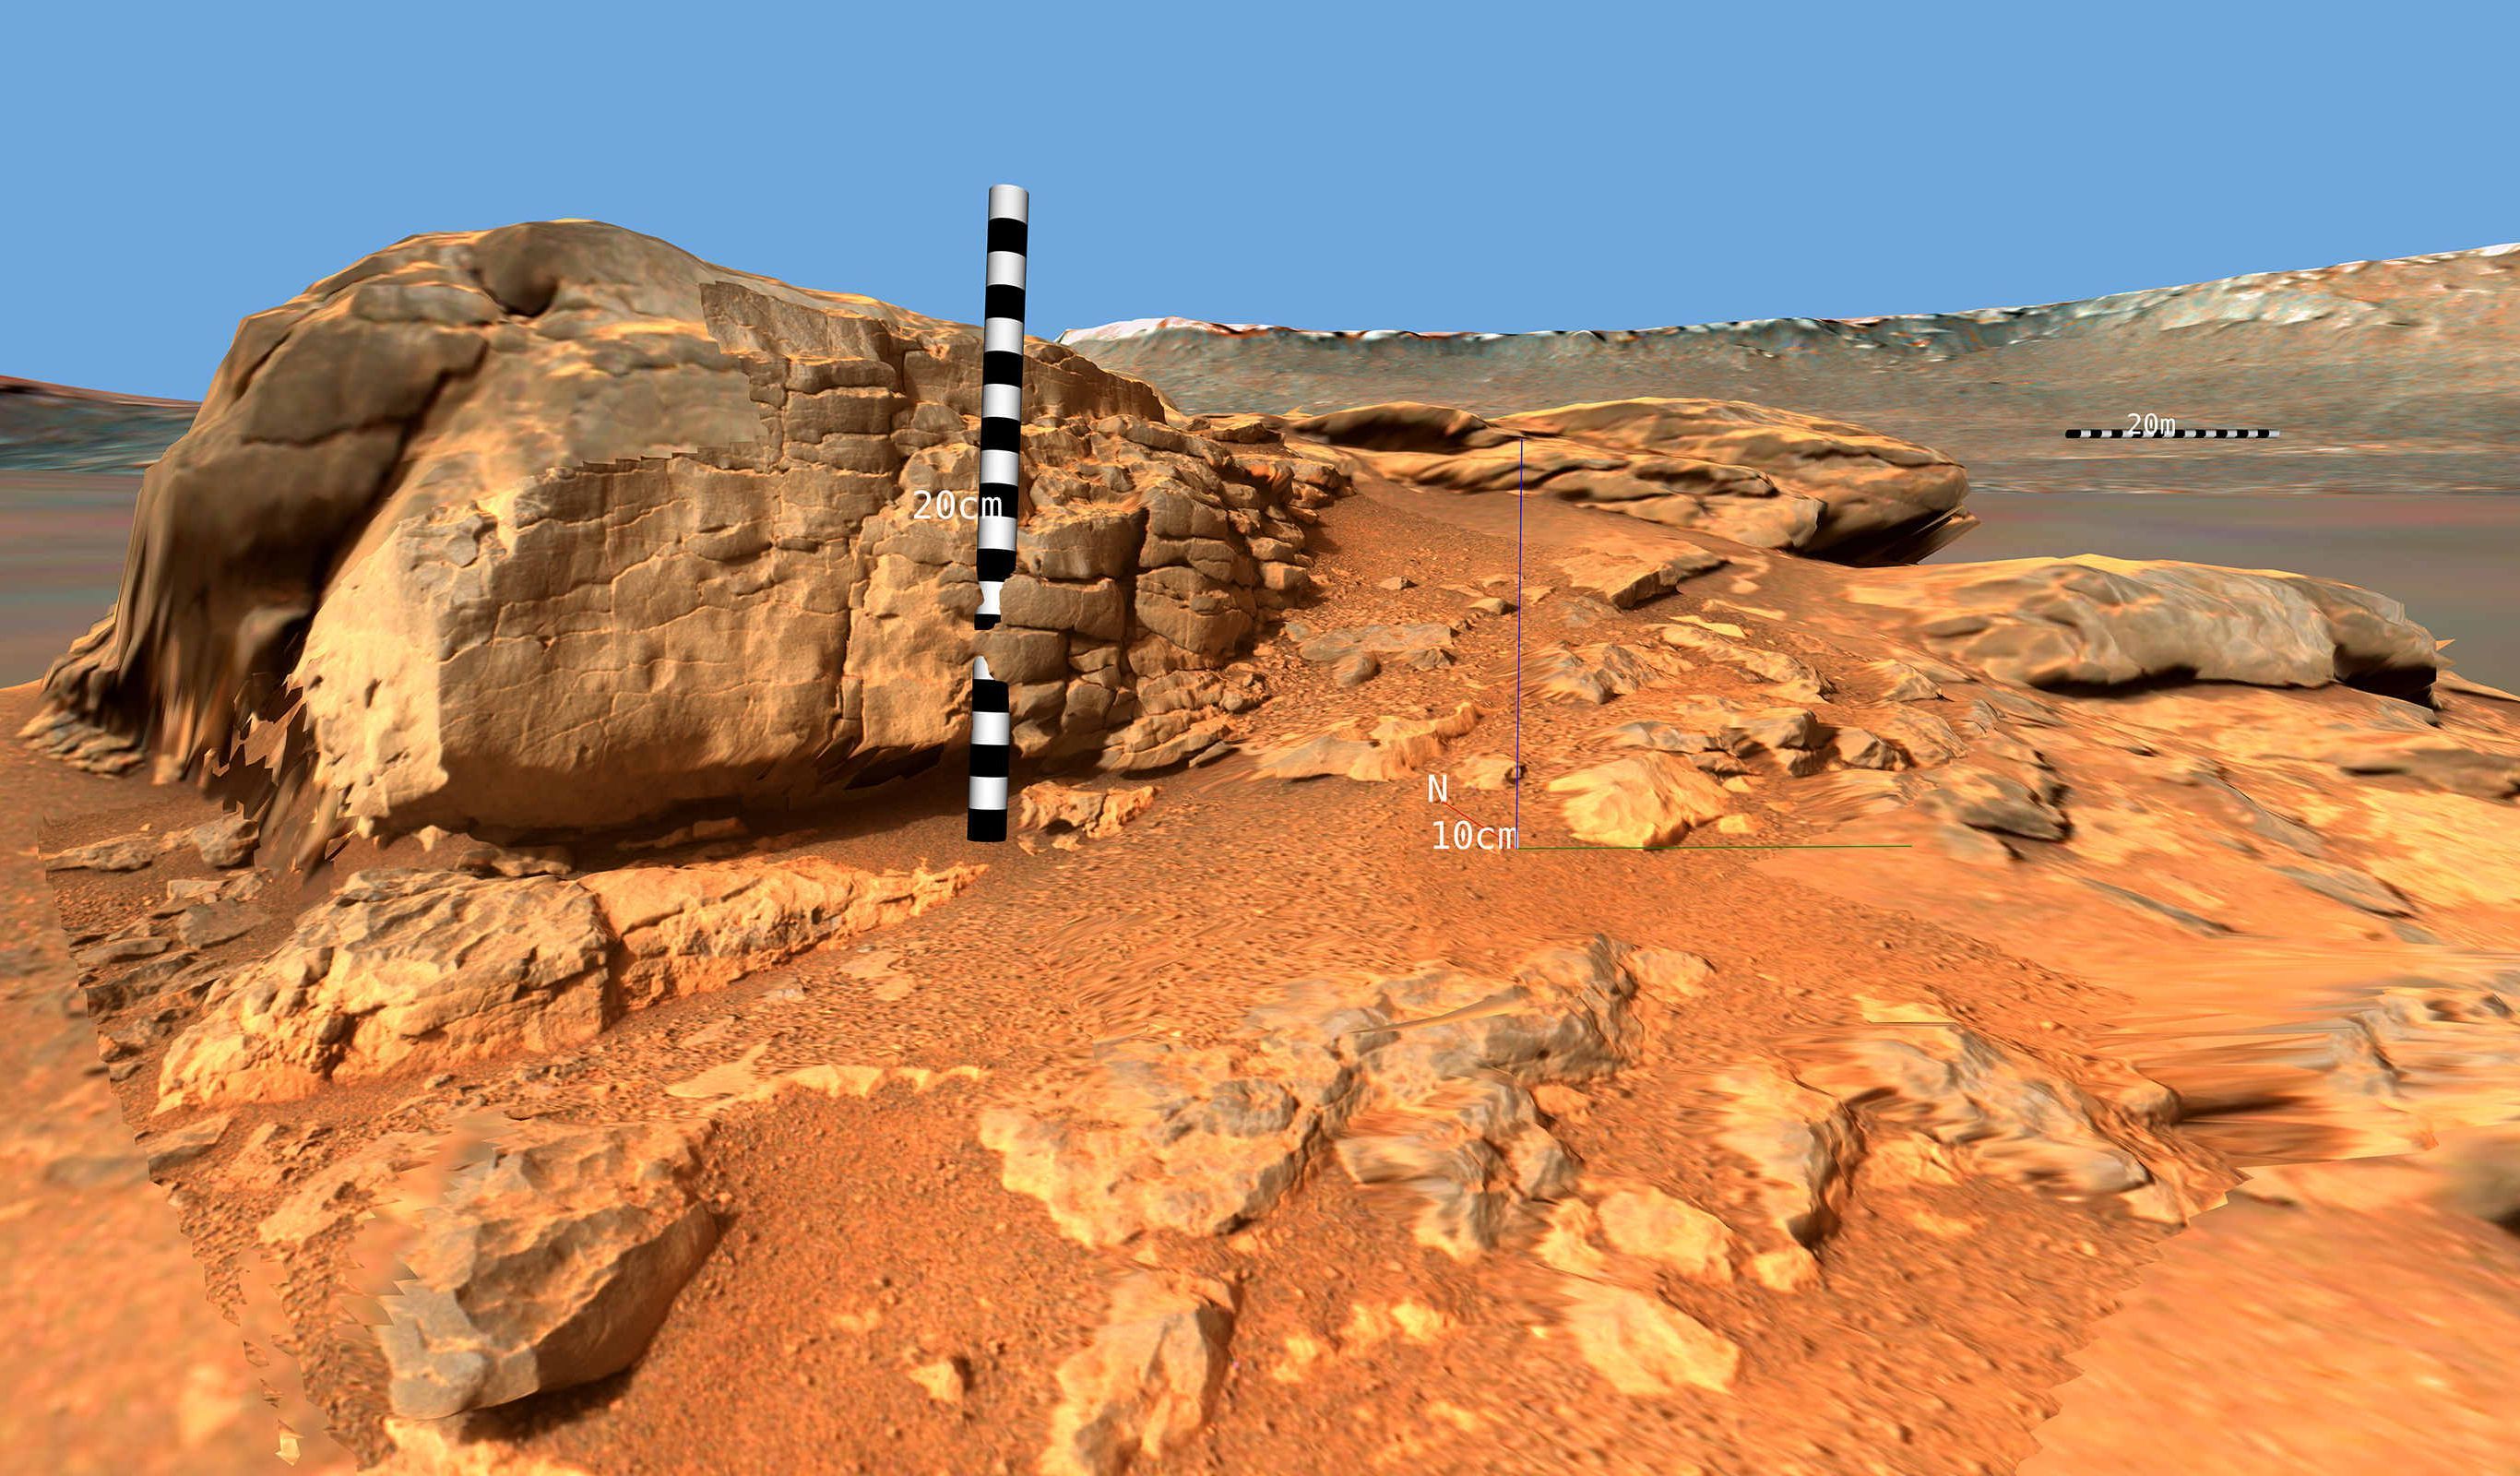 3D reconstruction of the surface of Mars with a scale ruler